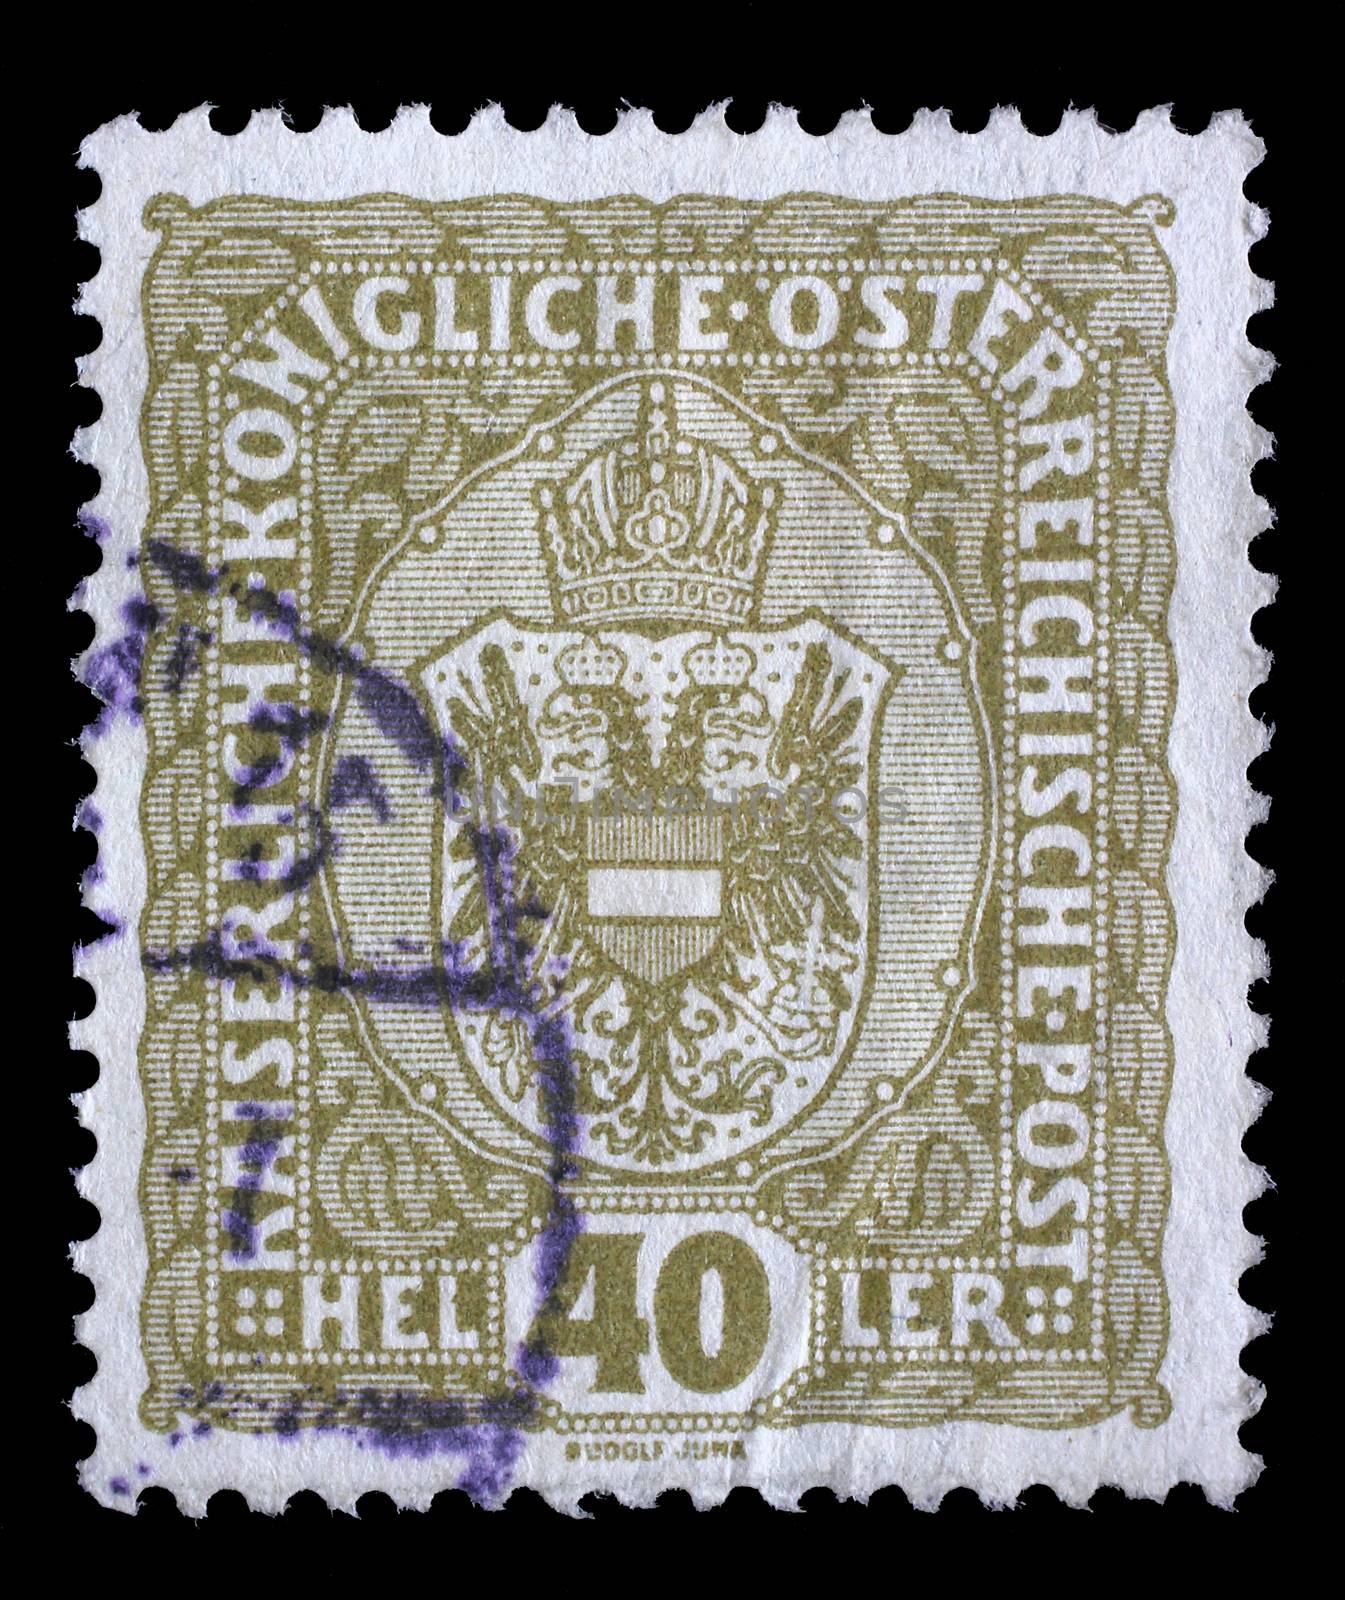 Stamp printed by Austria, shows crown and eagle by atlas